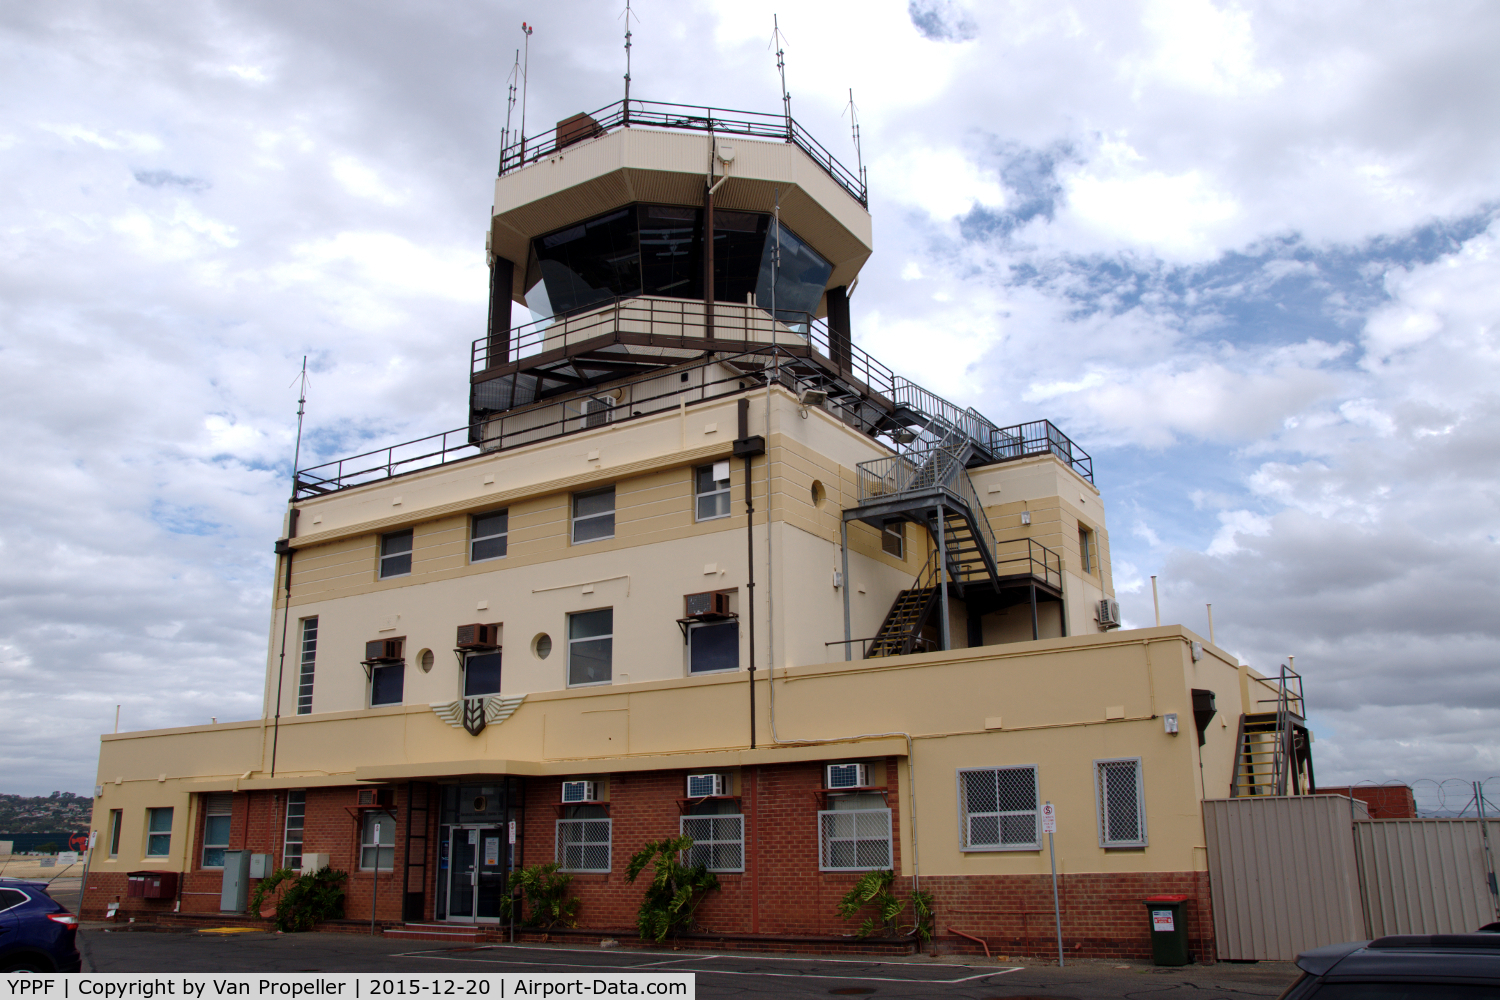 Parafield Airport, Salisbury, South Australia Australia (YPPF) - The control tower at Parafield.